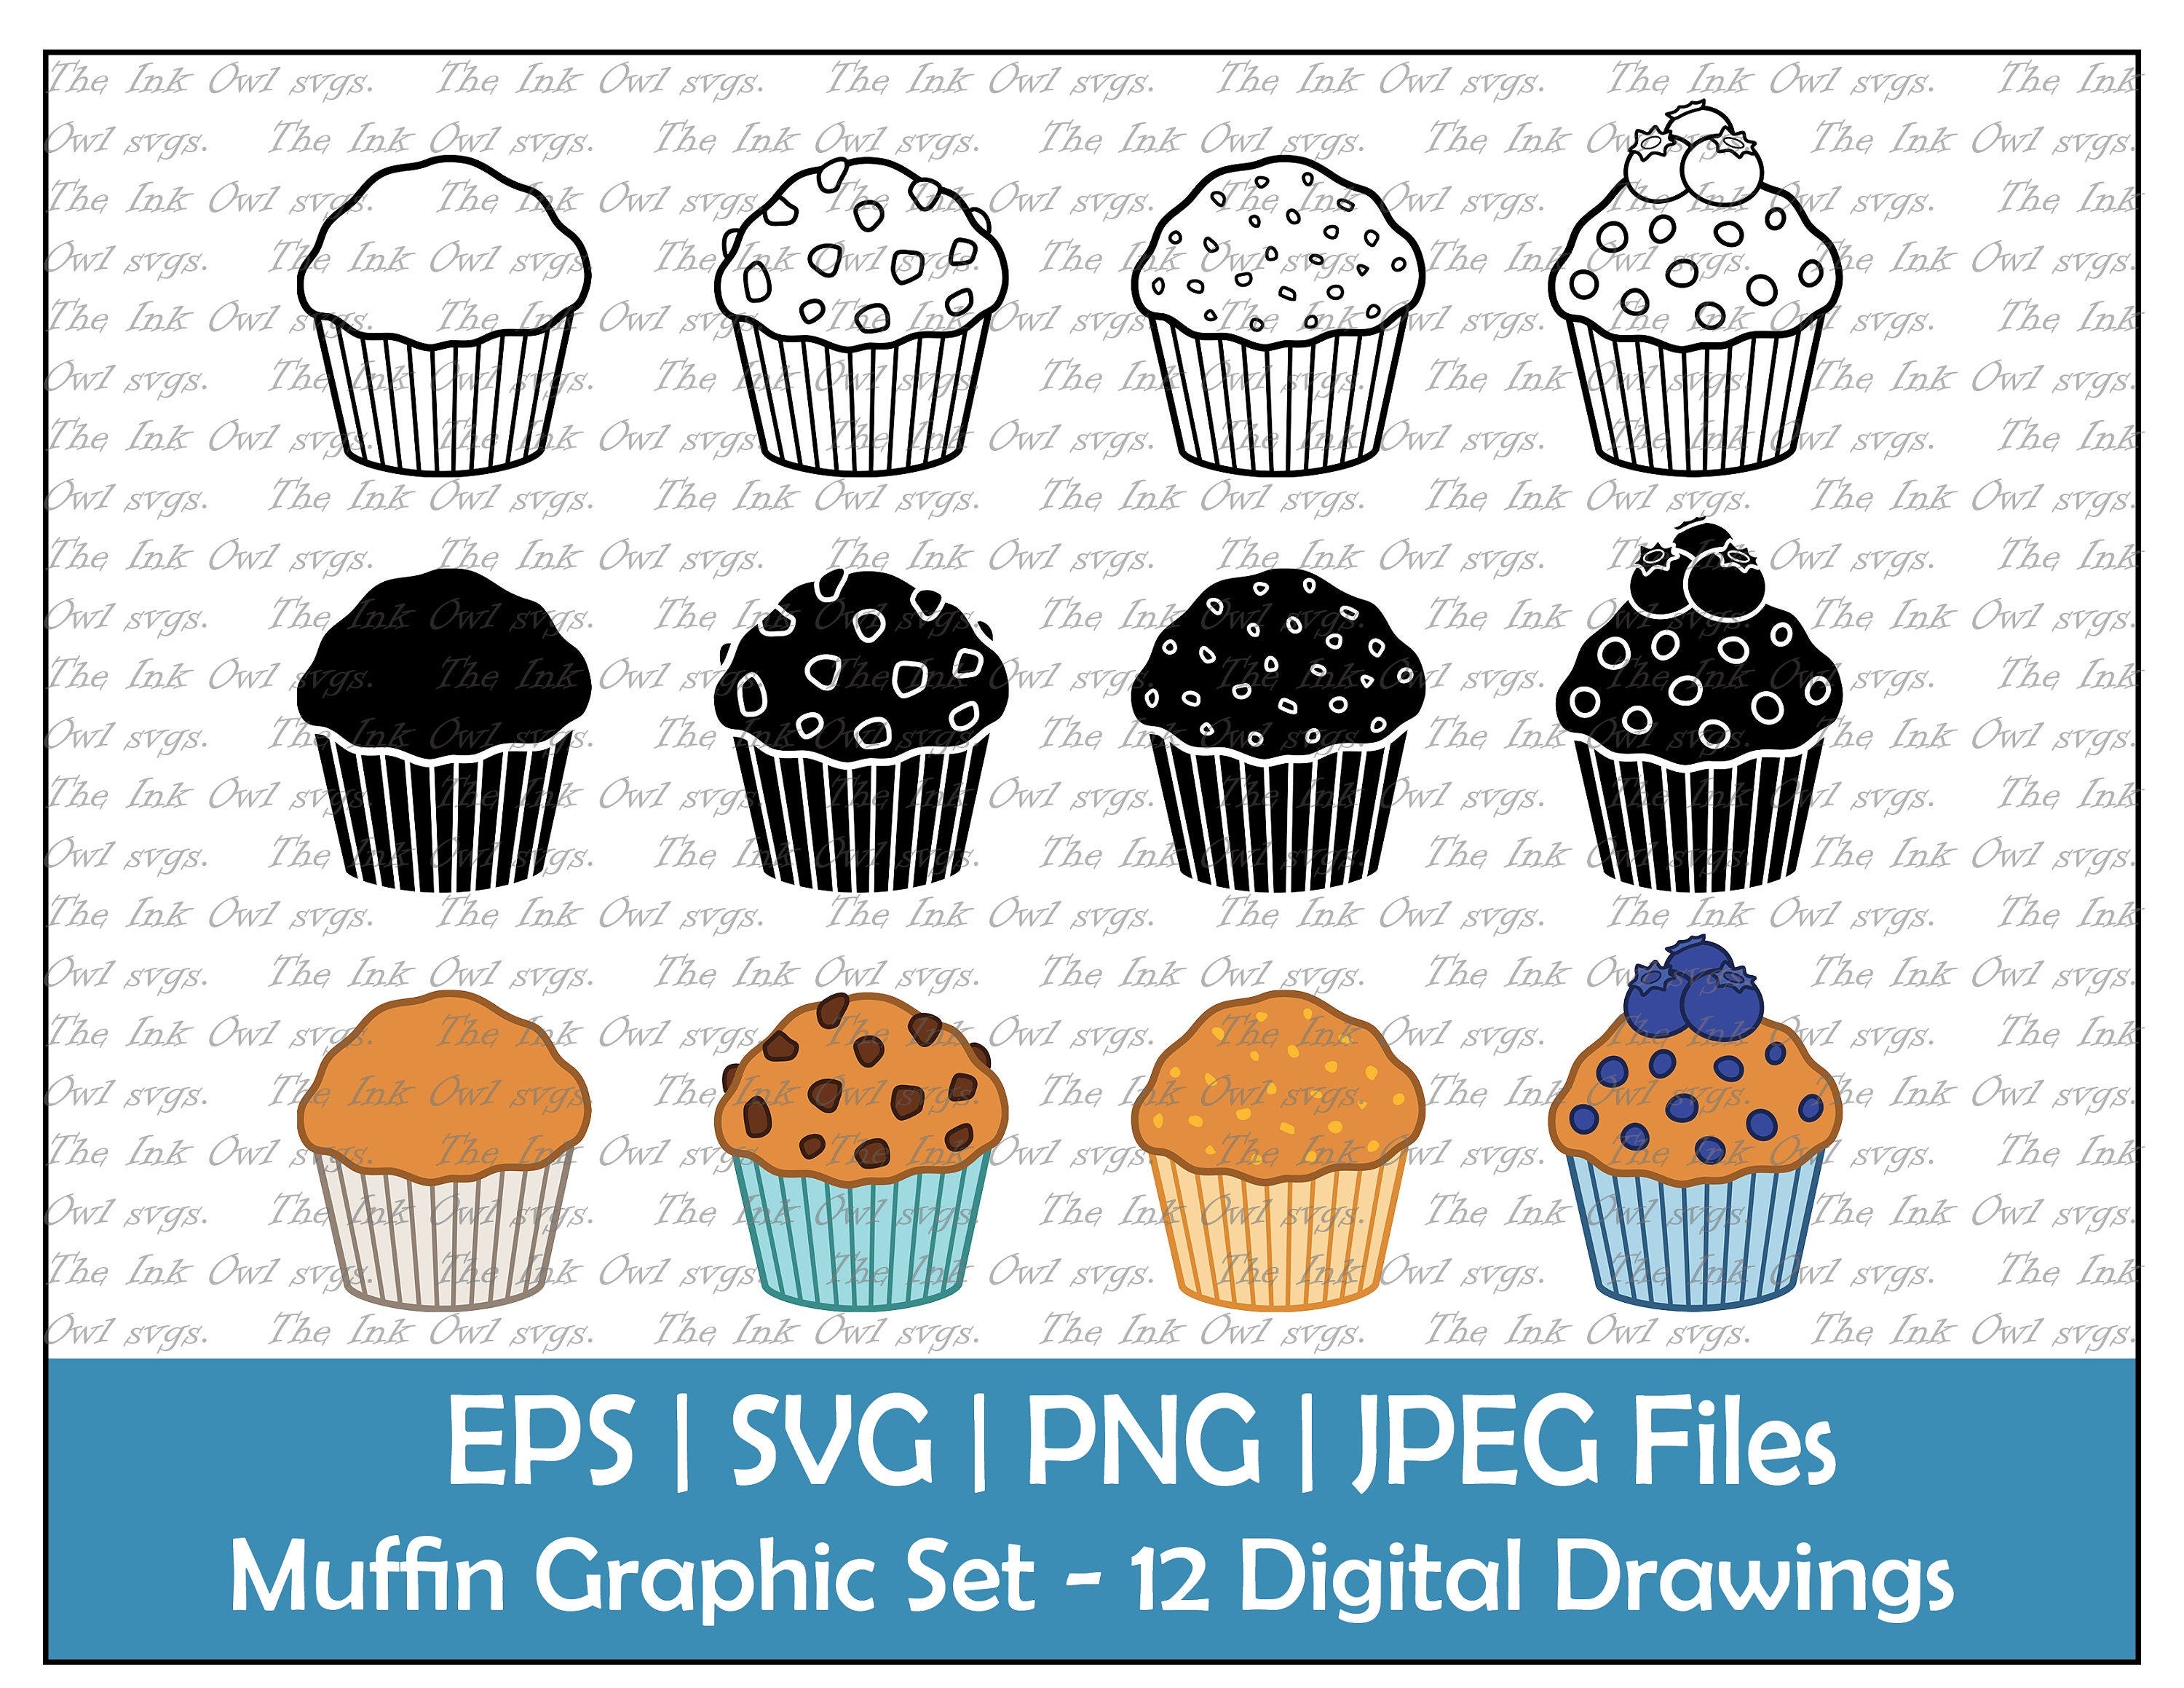 Muffins Vector Clipart Set / Outline, Stamp & Color Graphics / Plain, Carrot - Bran, Chocolate Chip, and Blueberry / PNG, JPG, SVG, Eps